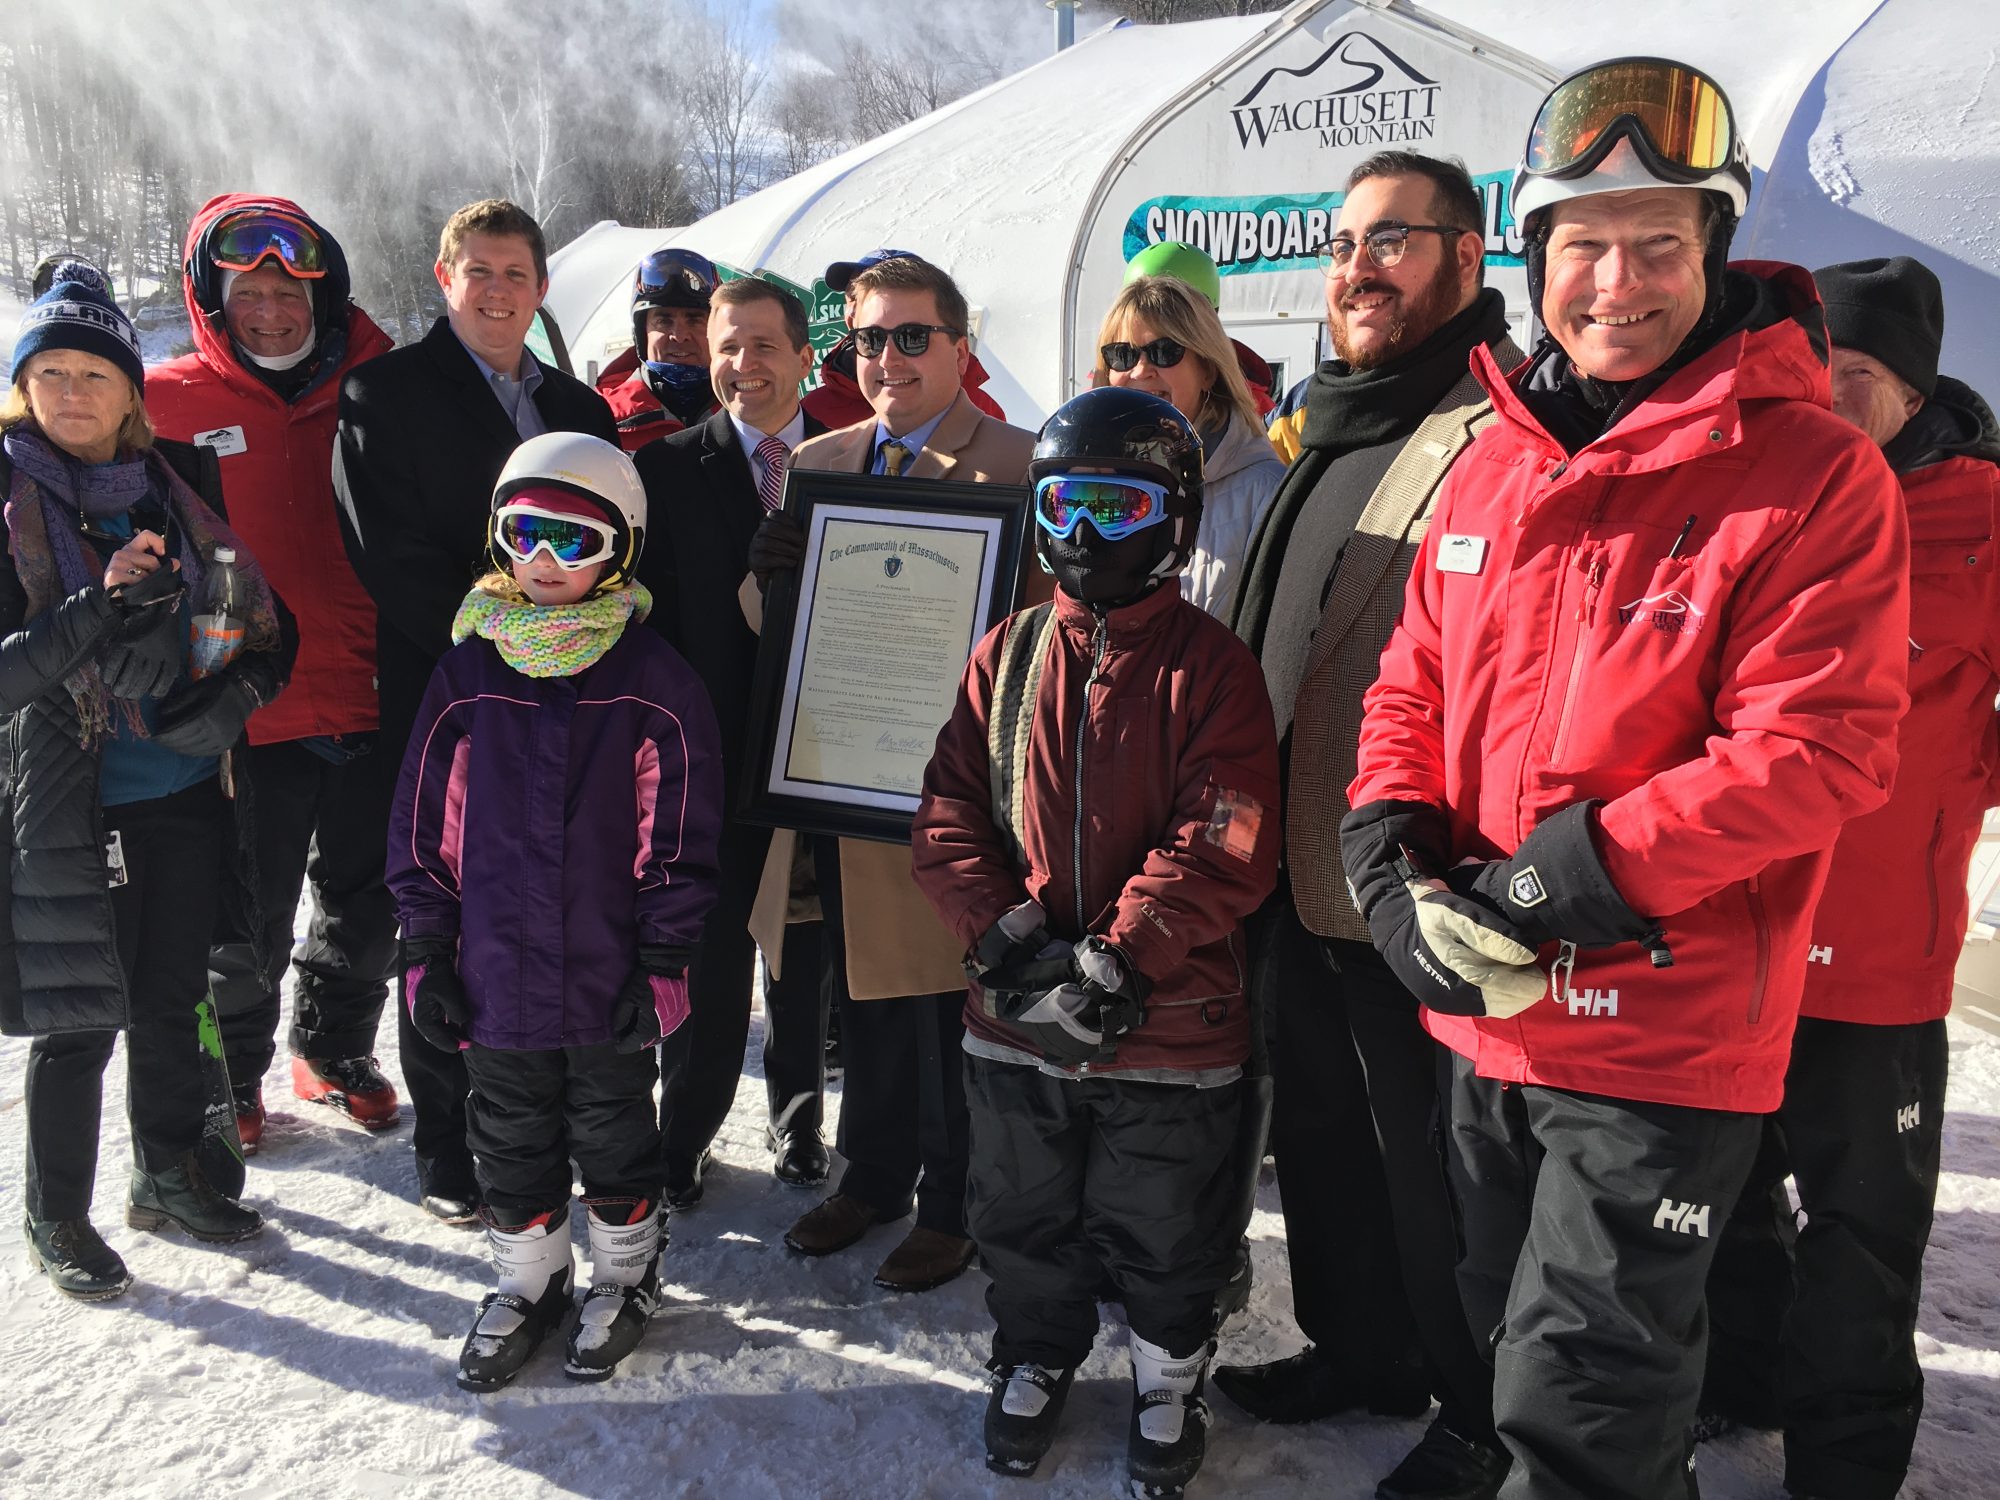 Wachusett Mountain Ski Area. Learn to Ski and Snowboard. First National Learn to Ski and Snowboard Day in the US.